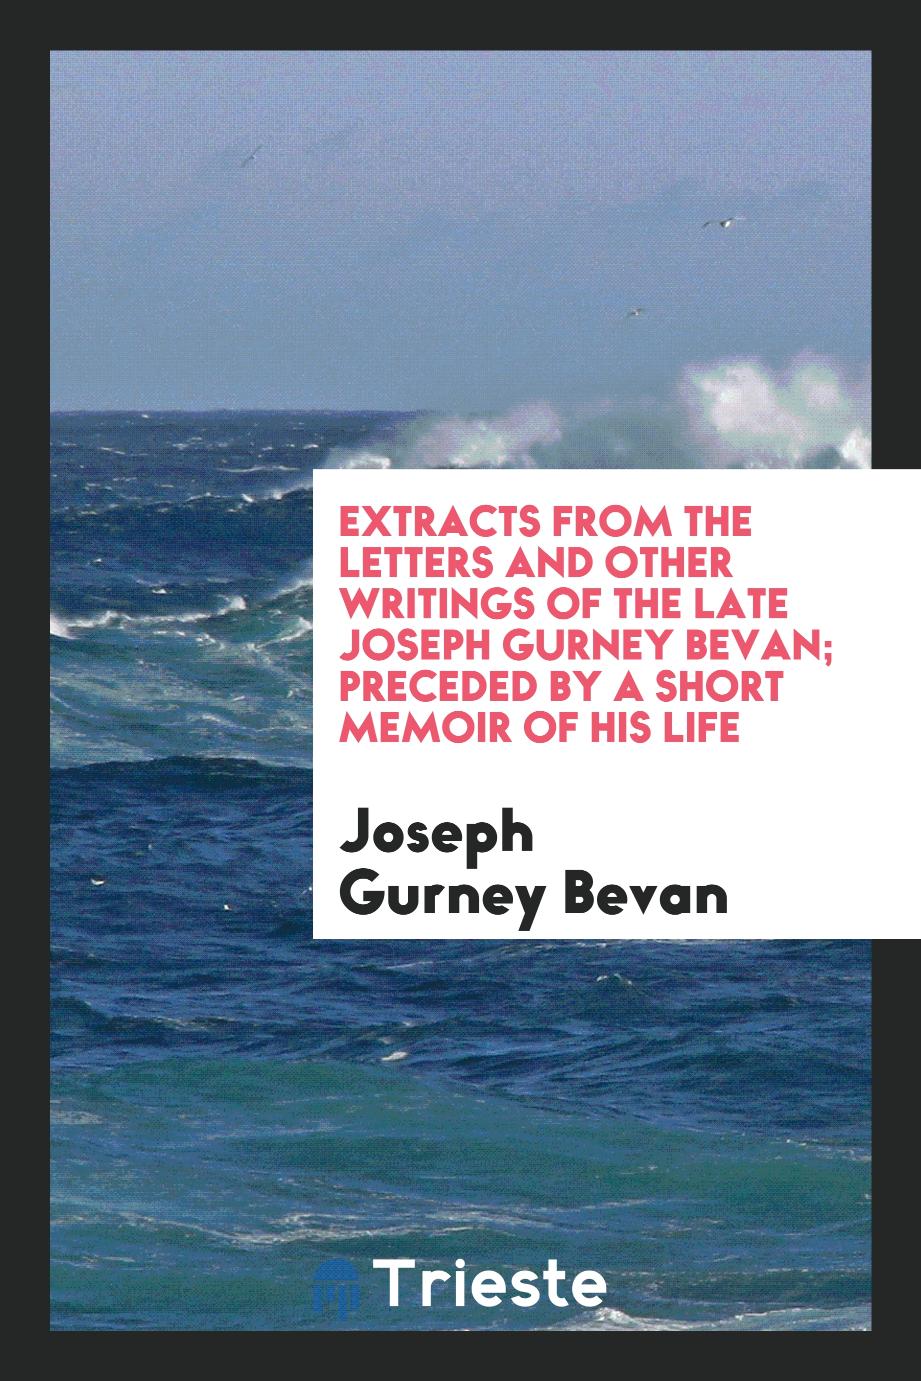 Extracts from the letters and other writings of the late Joseph Gurney Bevan; preceded by a short memoir of his life